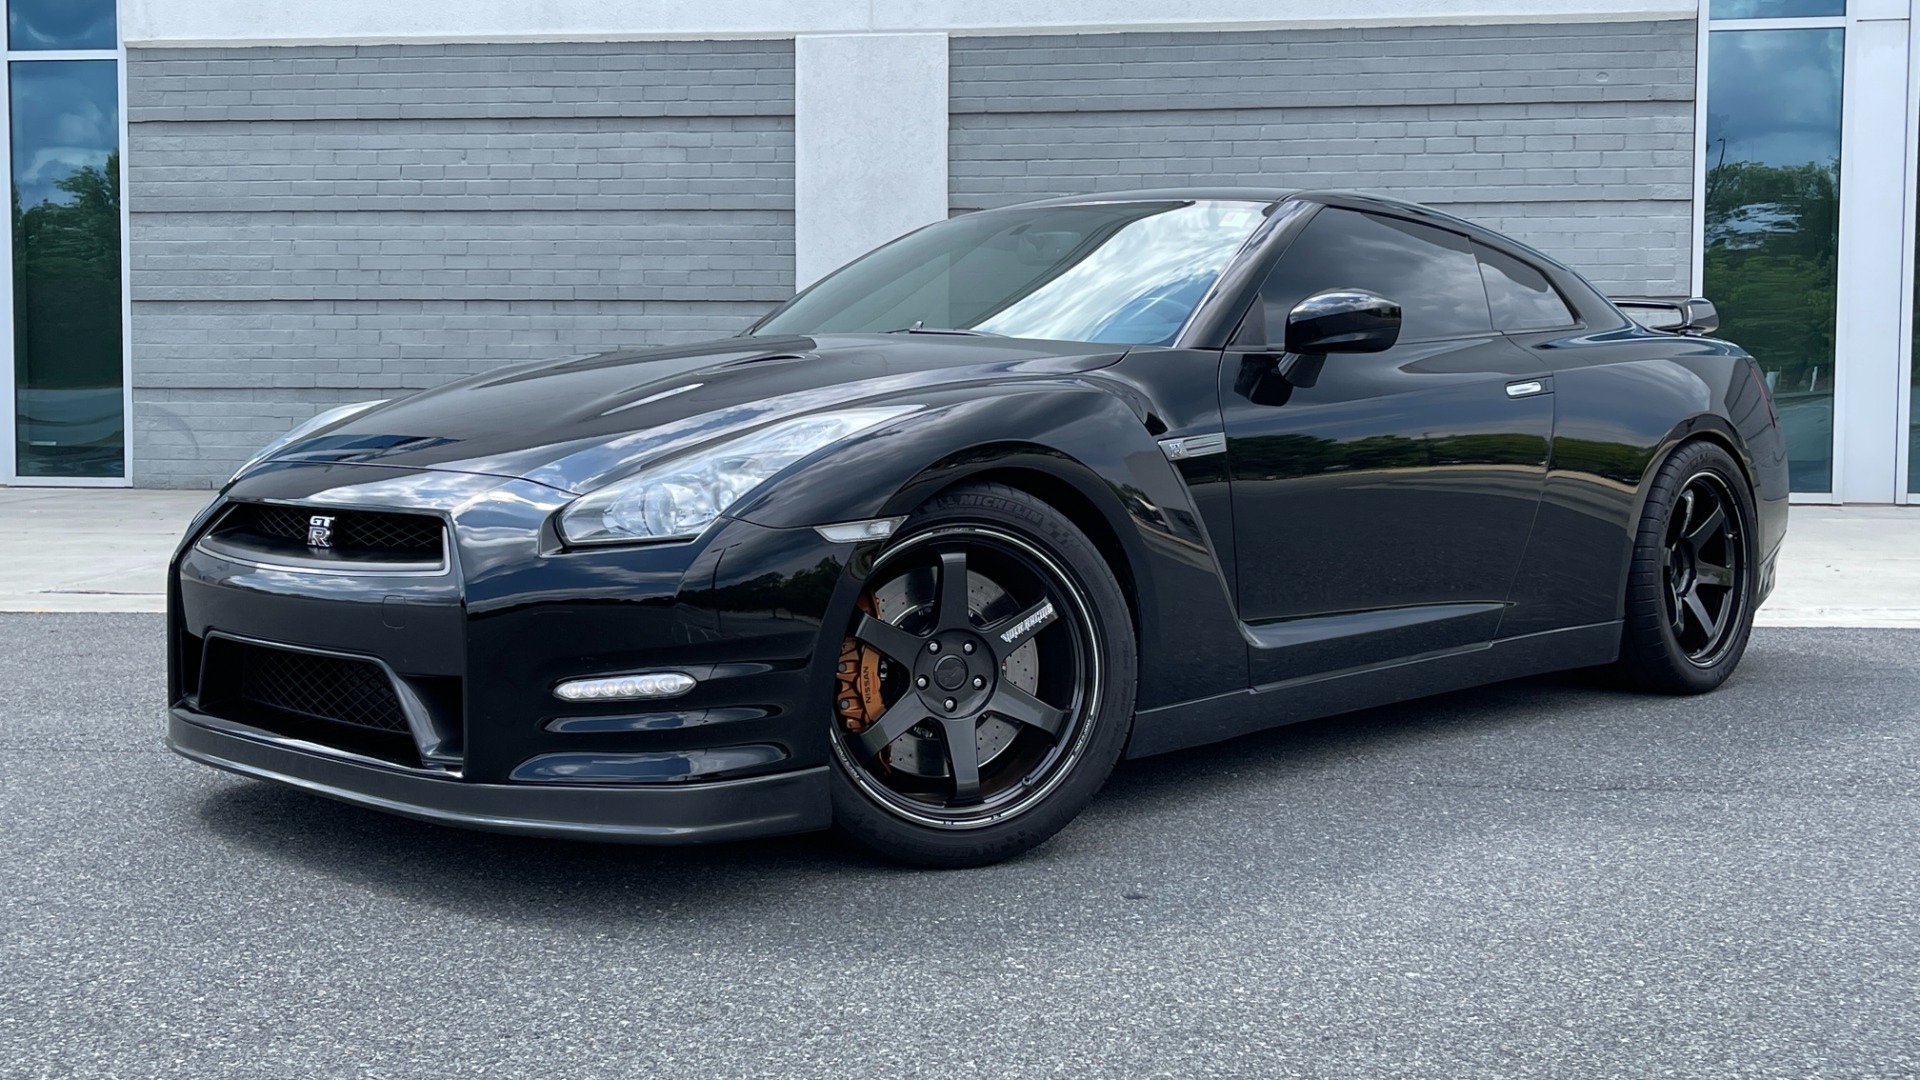 Used 2013 Nissan GT-R PREMIUM COUPE / 3.8L TWIN-TURBO / 6-SPD AUTO / COLD WTHR PKG / CAMERA for sale Sold at Formula Imports in Charlotte NC 28227 2